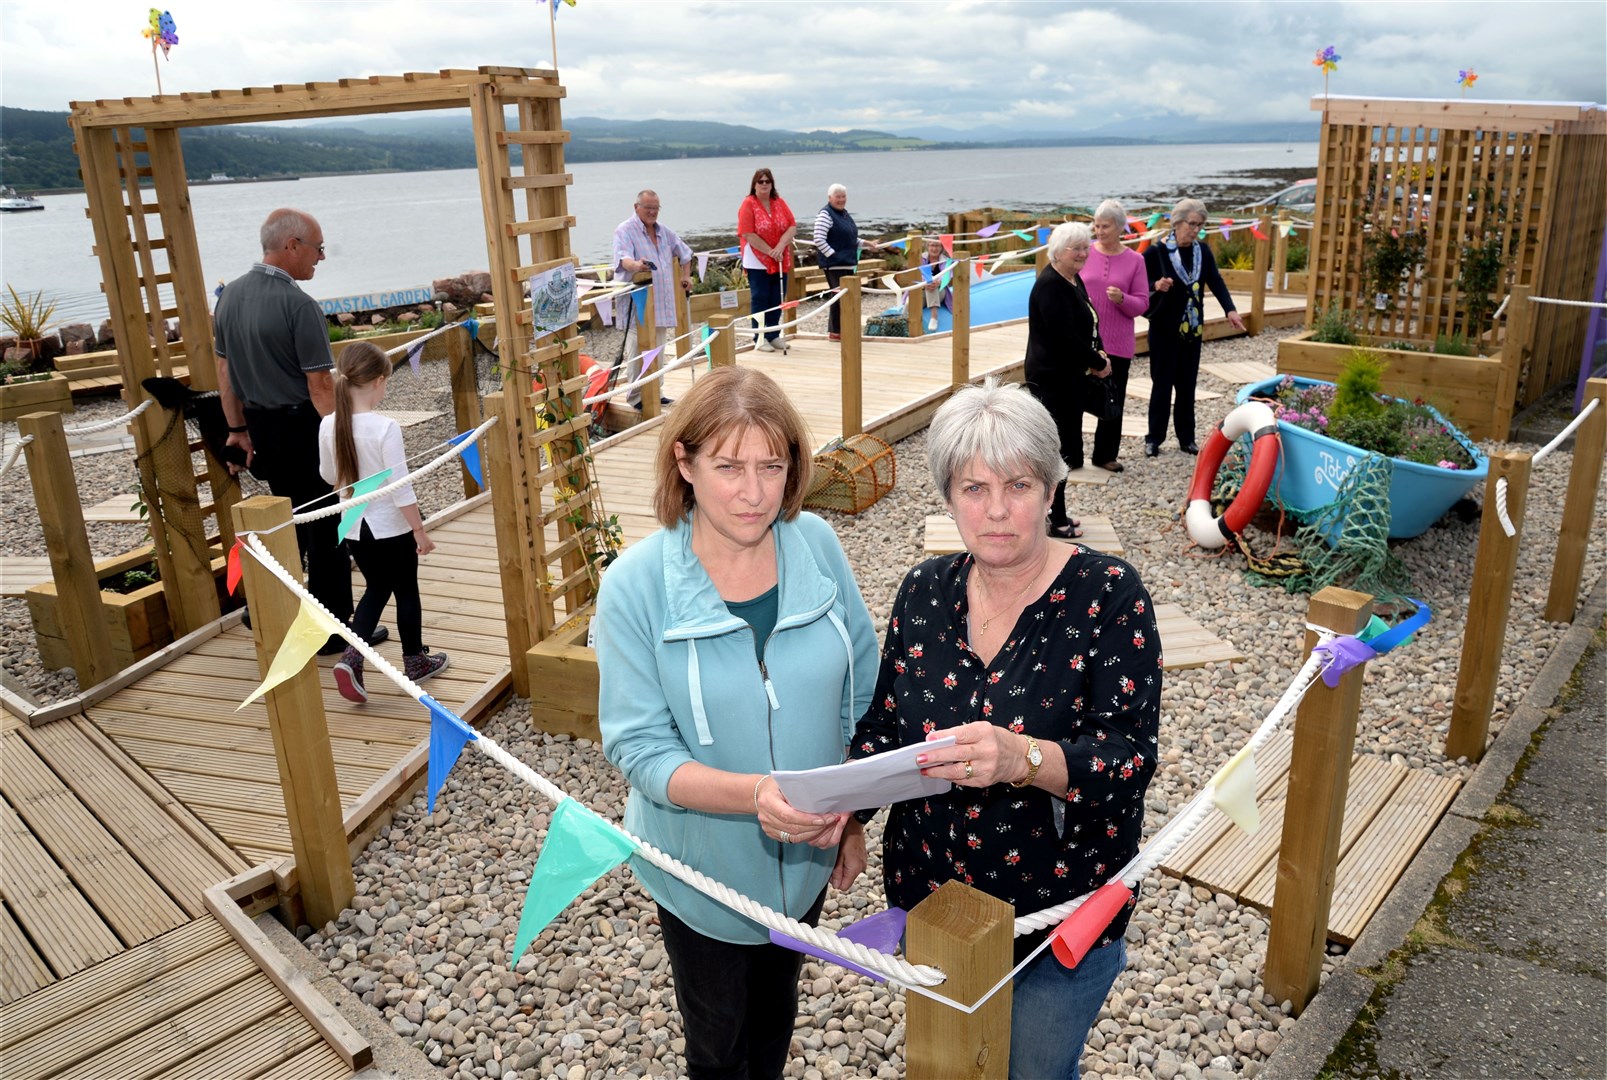 Pictured at the ticket office garden with the letter from the council chief executive are North Kessock residents.Jackie Patience (front right) and Maggie MacDonald who is the chairwoman of NKTOP, North Kessock Ticket Office Project....Bottle bank objectors.Picture: Gair Fraser. Image No. 044414..